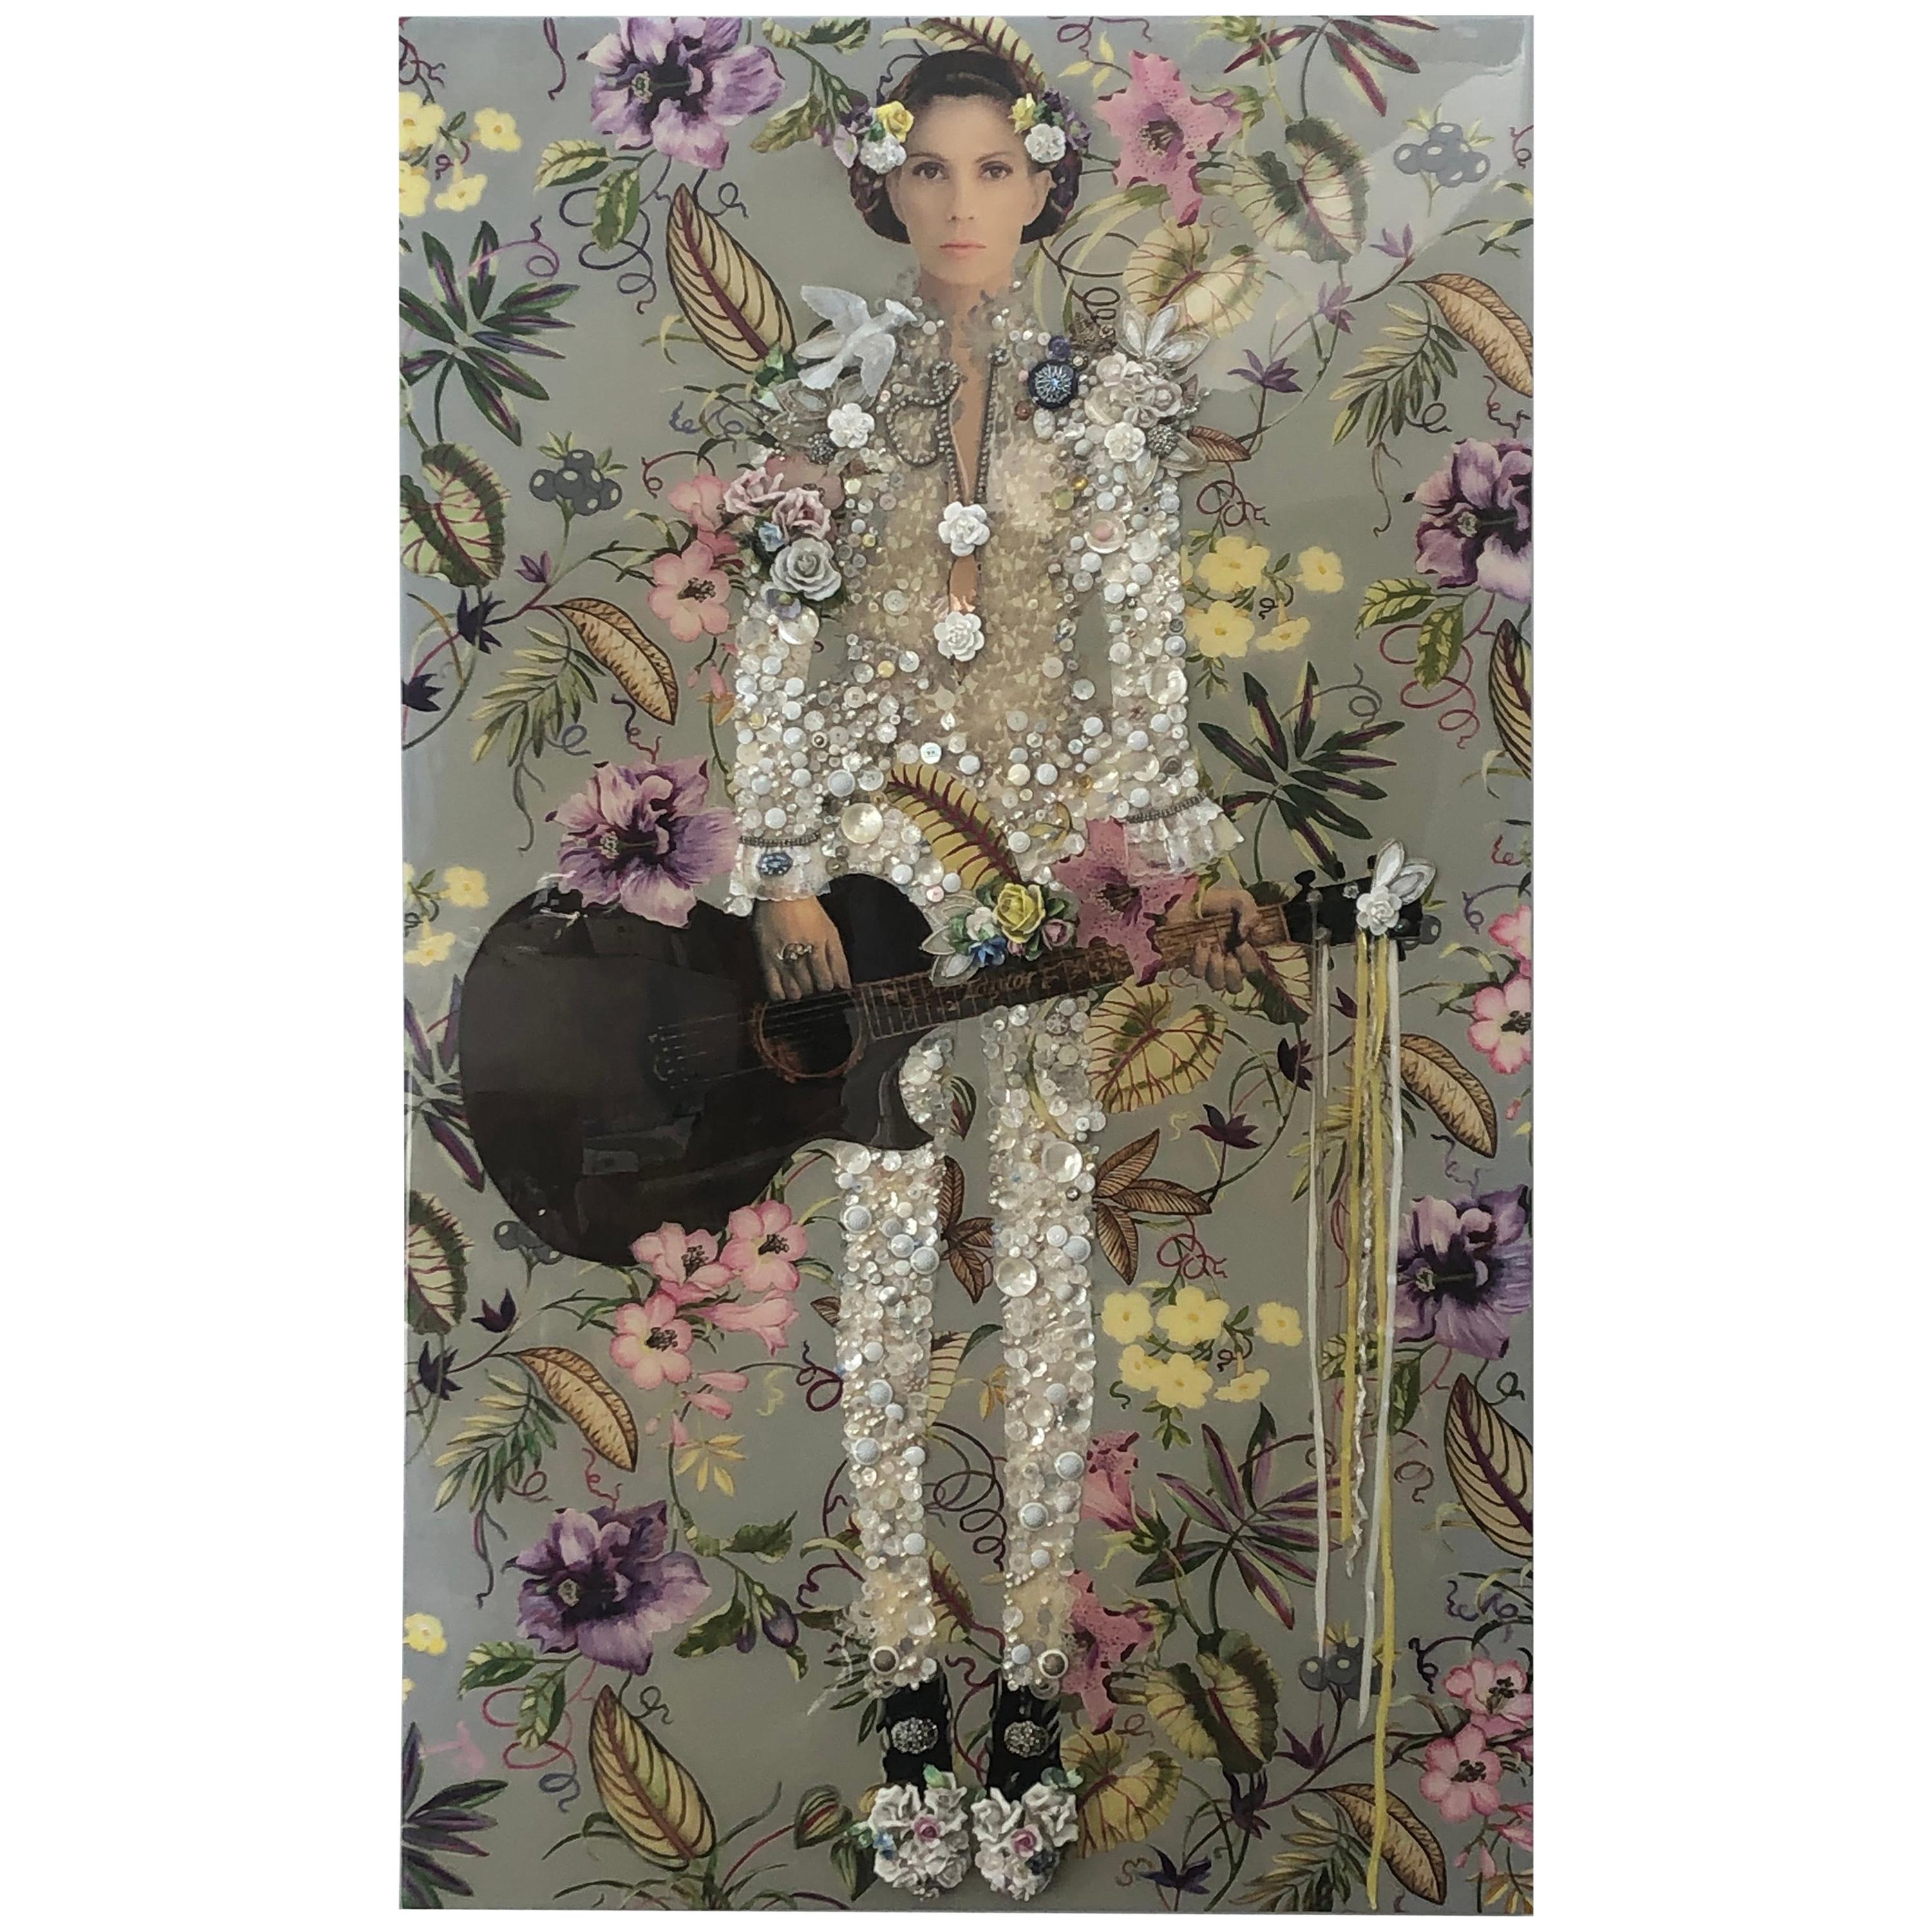 Nina Surel "Woman With Guitar" Mixed-Media Collage Portrait, USA, 2010s